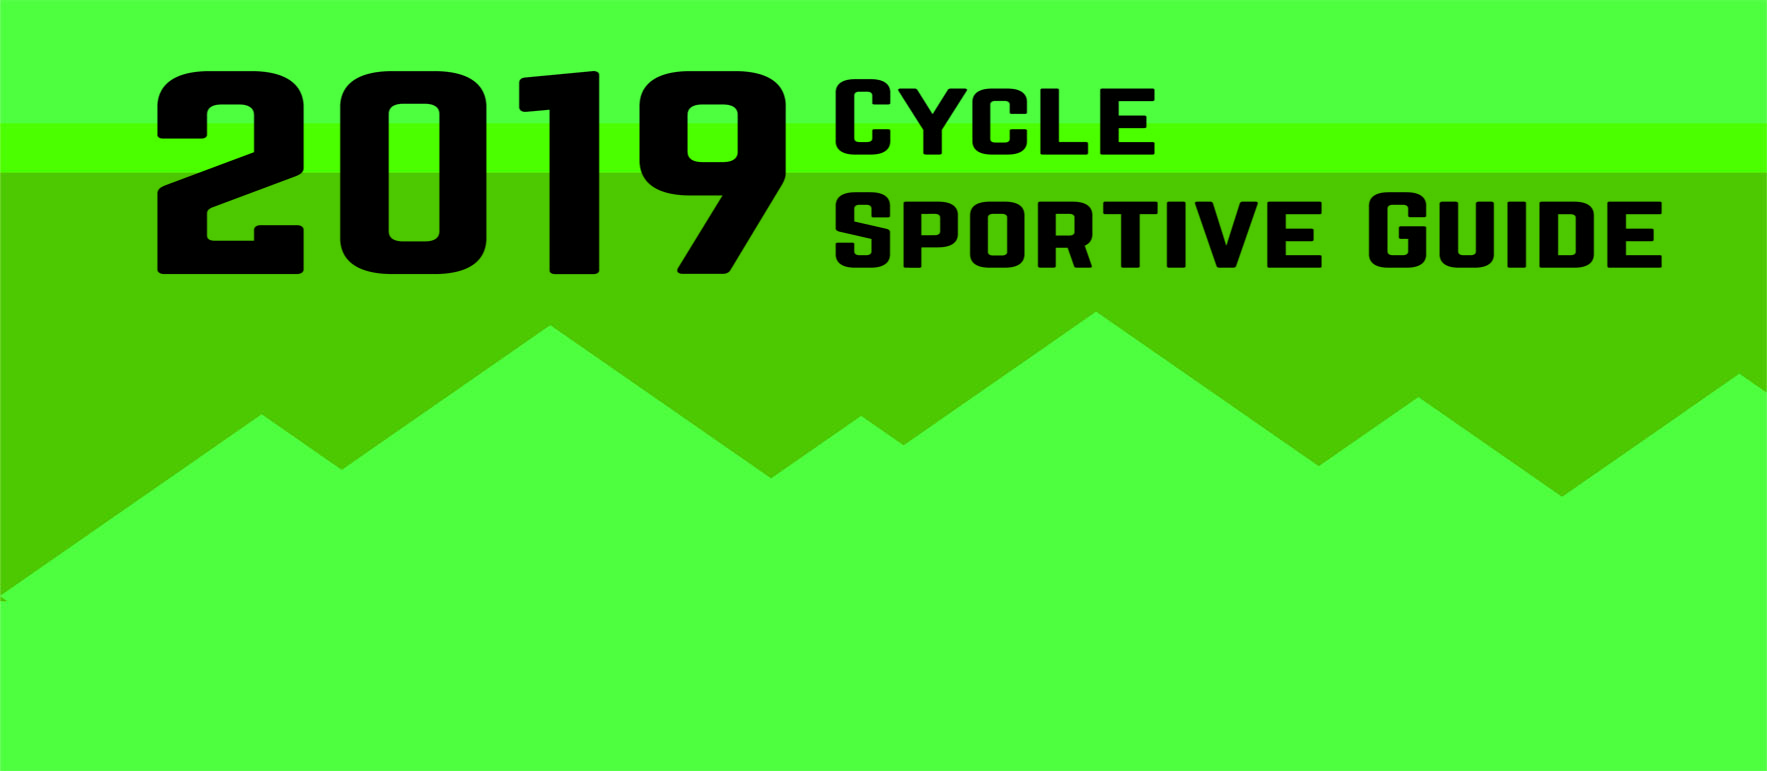 You are currently viewing Cycling Souvenirs 2019 Cyclo Sportive Guide